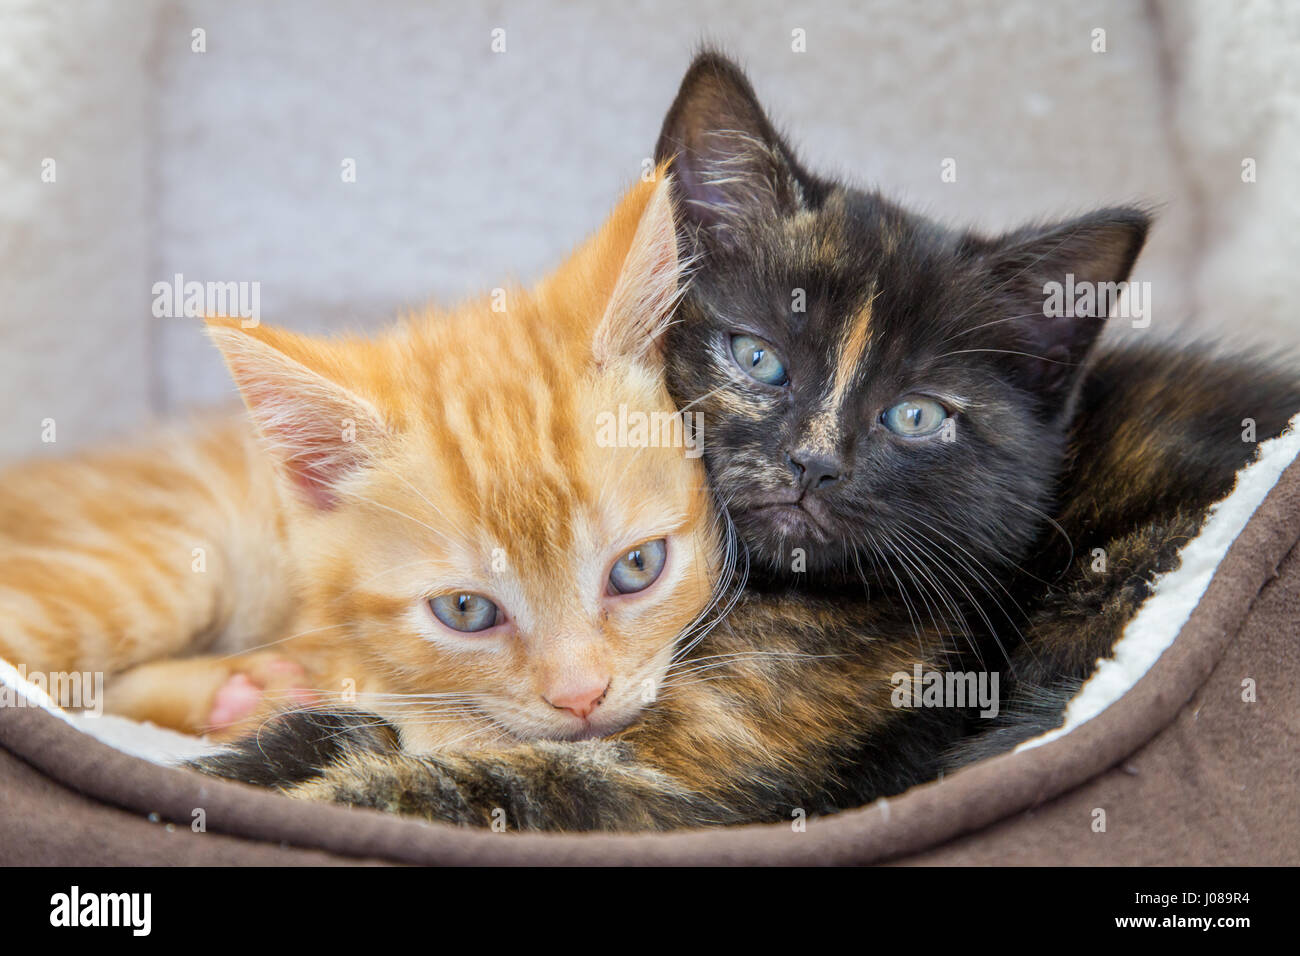 Cute ginger and tortoiseshell kittens together in a cat bed Stock Photo